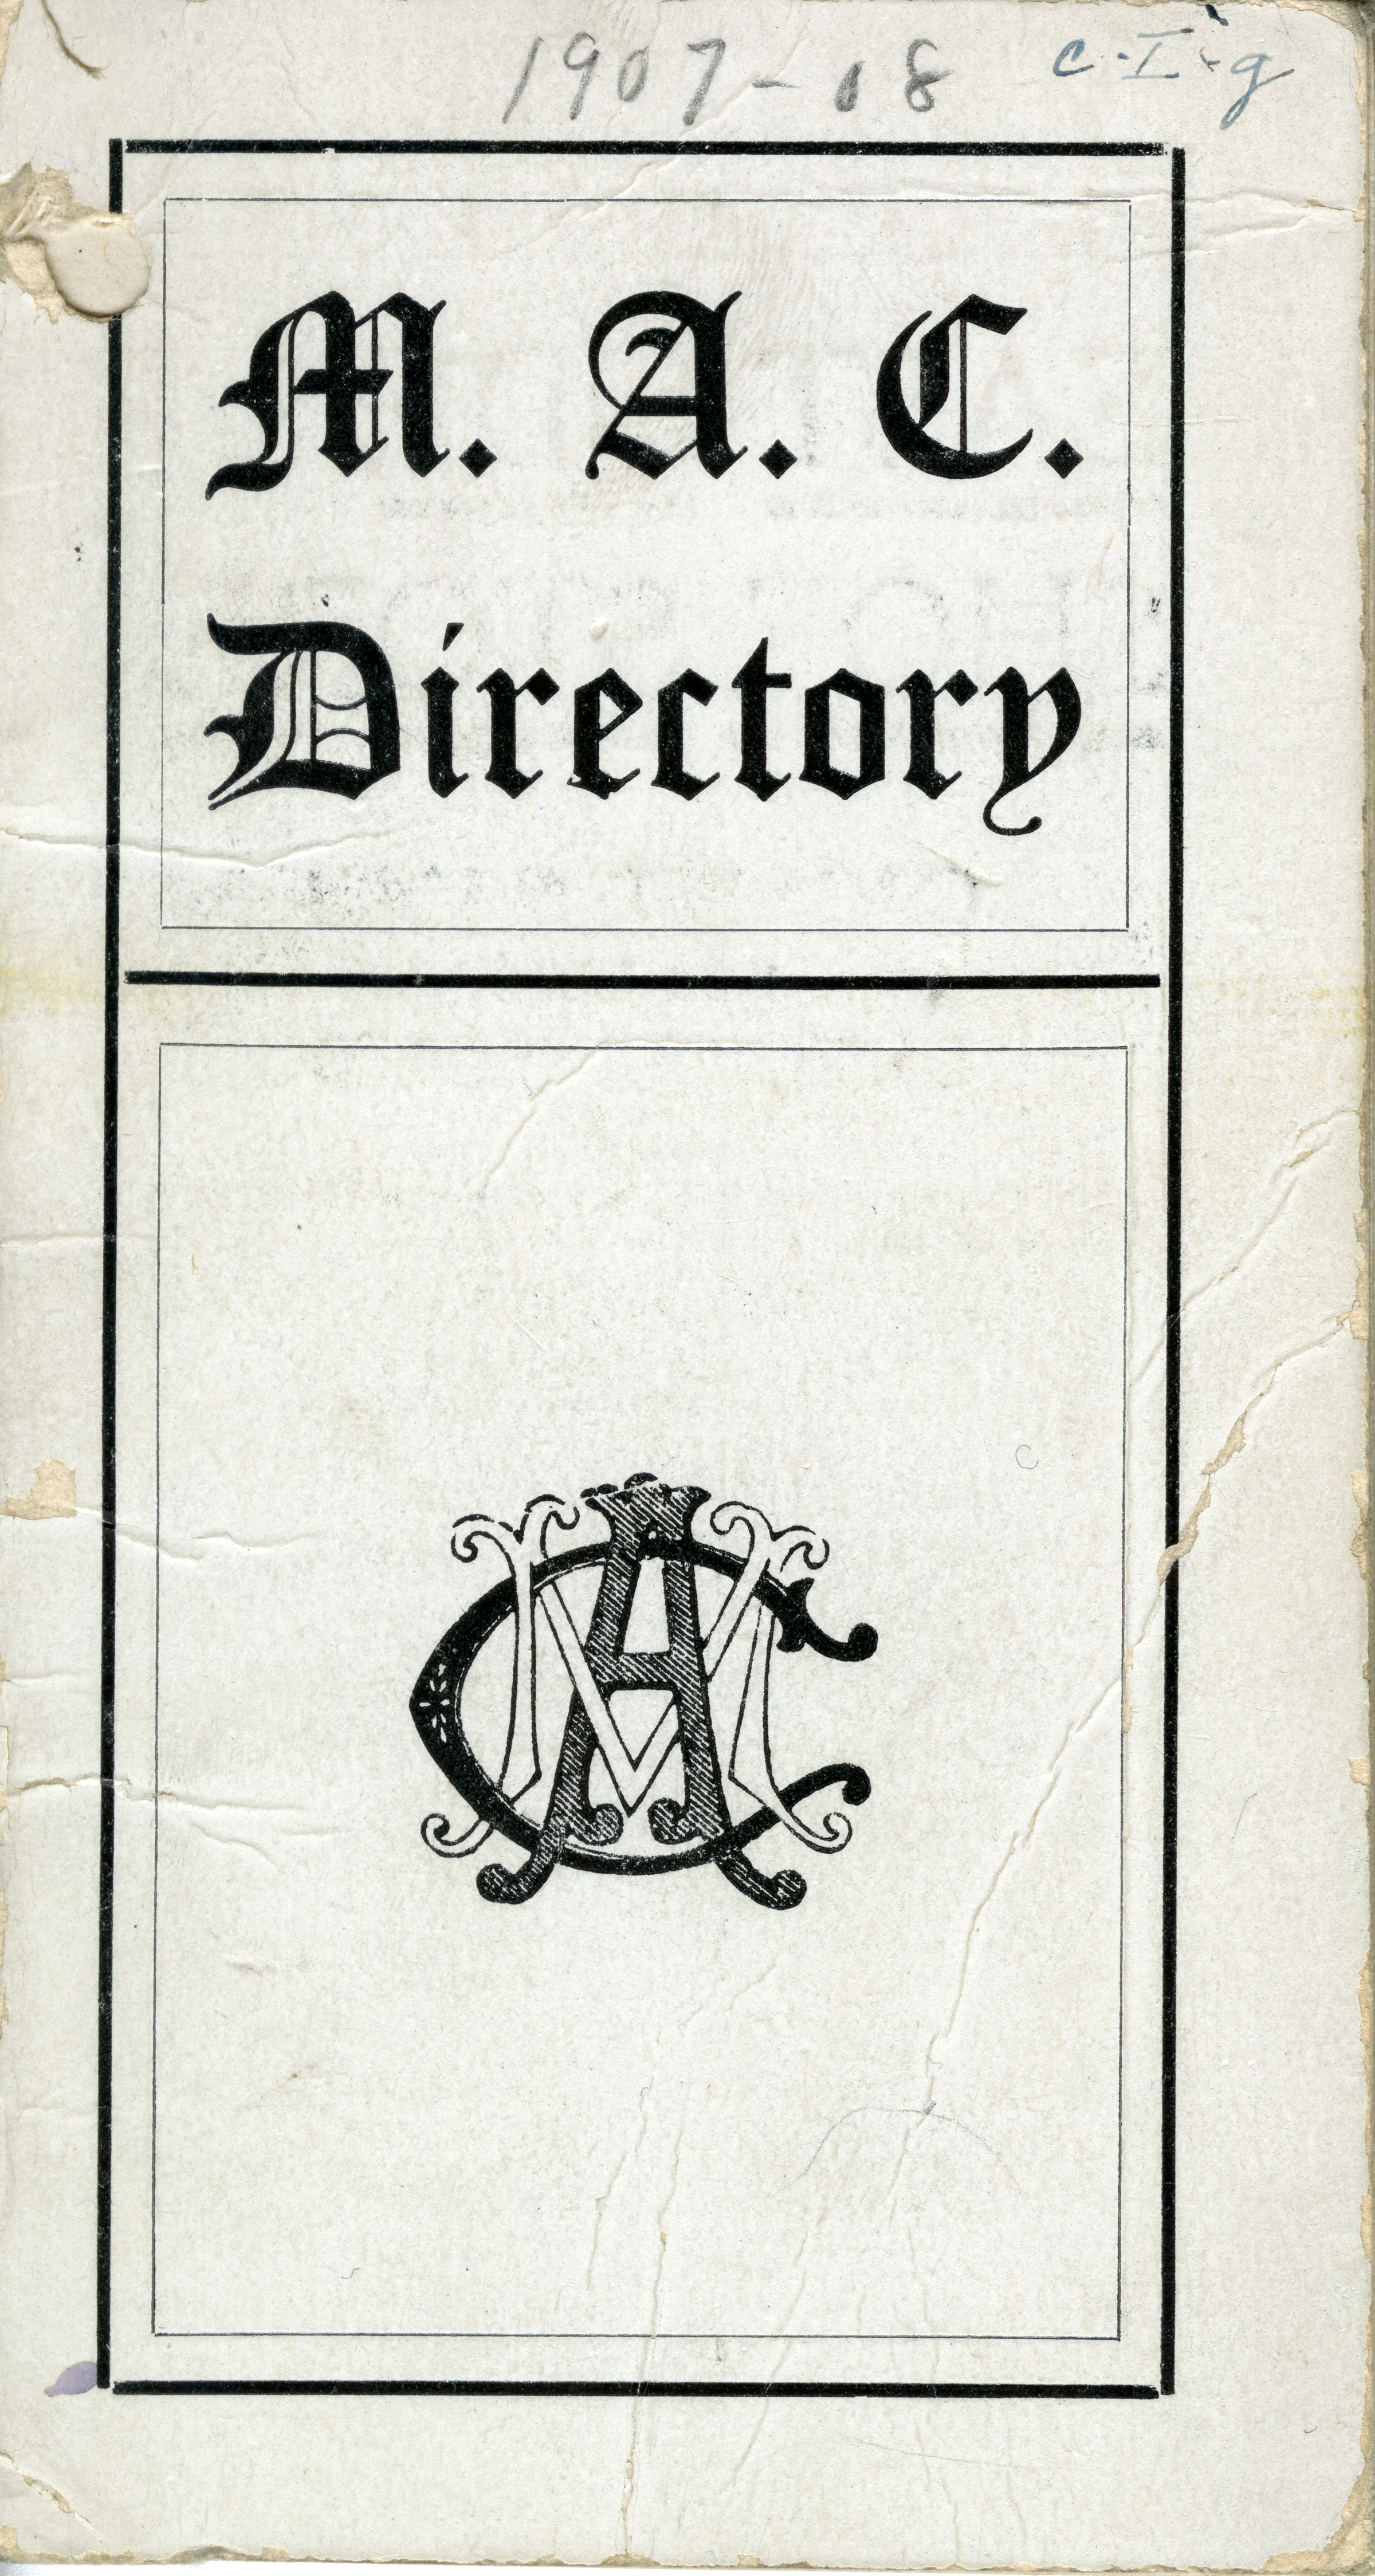 1907-1908 Michigan Agricultural College Faculty and Student Directory